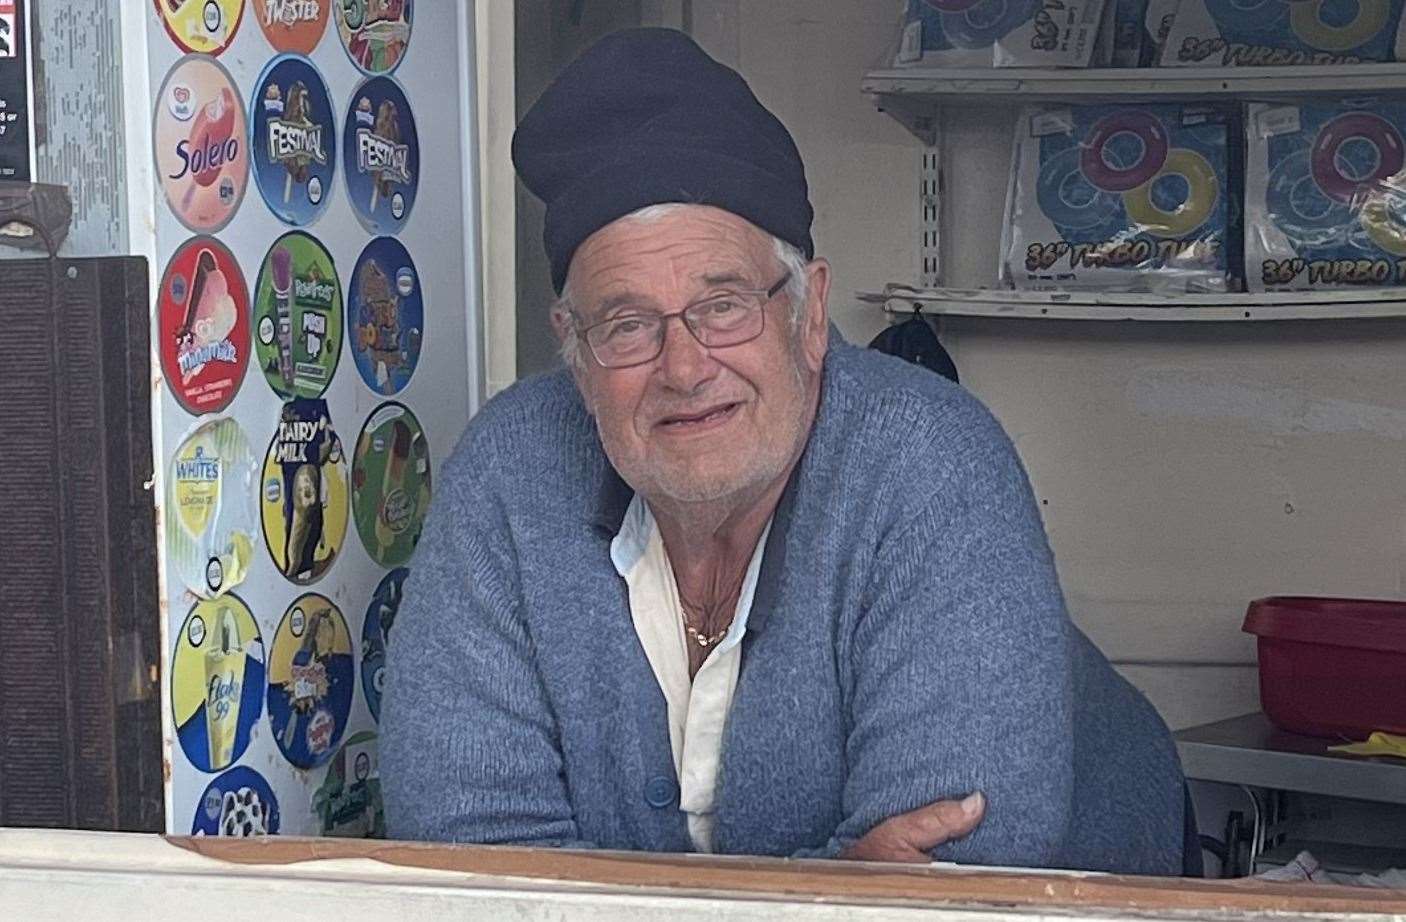 Tony Hobbs, 73, works at the West Bay Kiosk, and he wants more information on why West Bay in Thanet has had to close